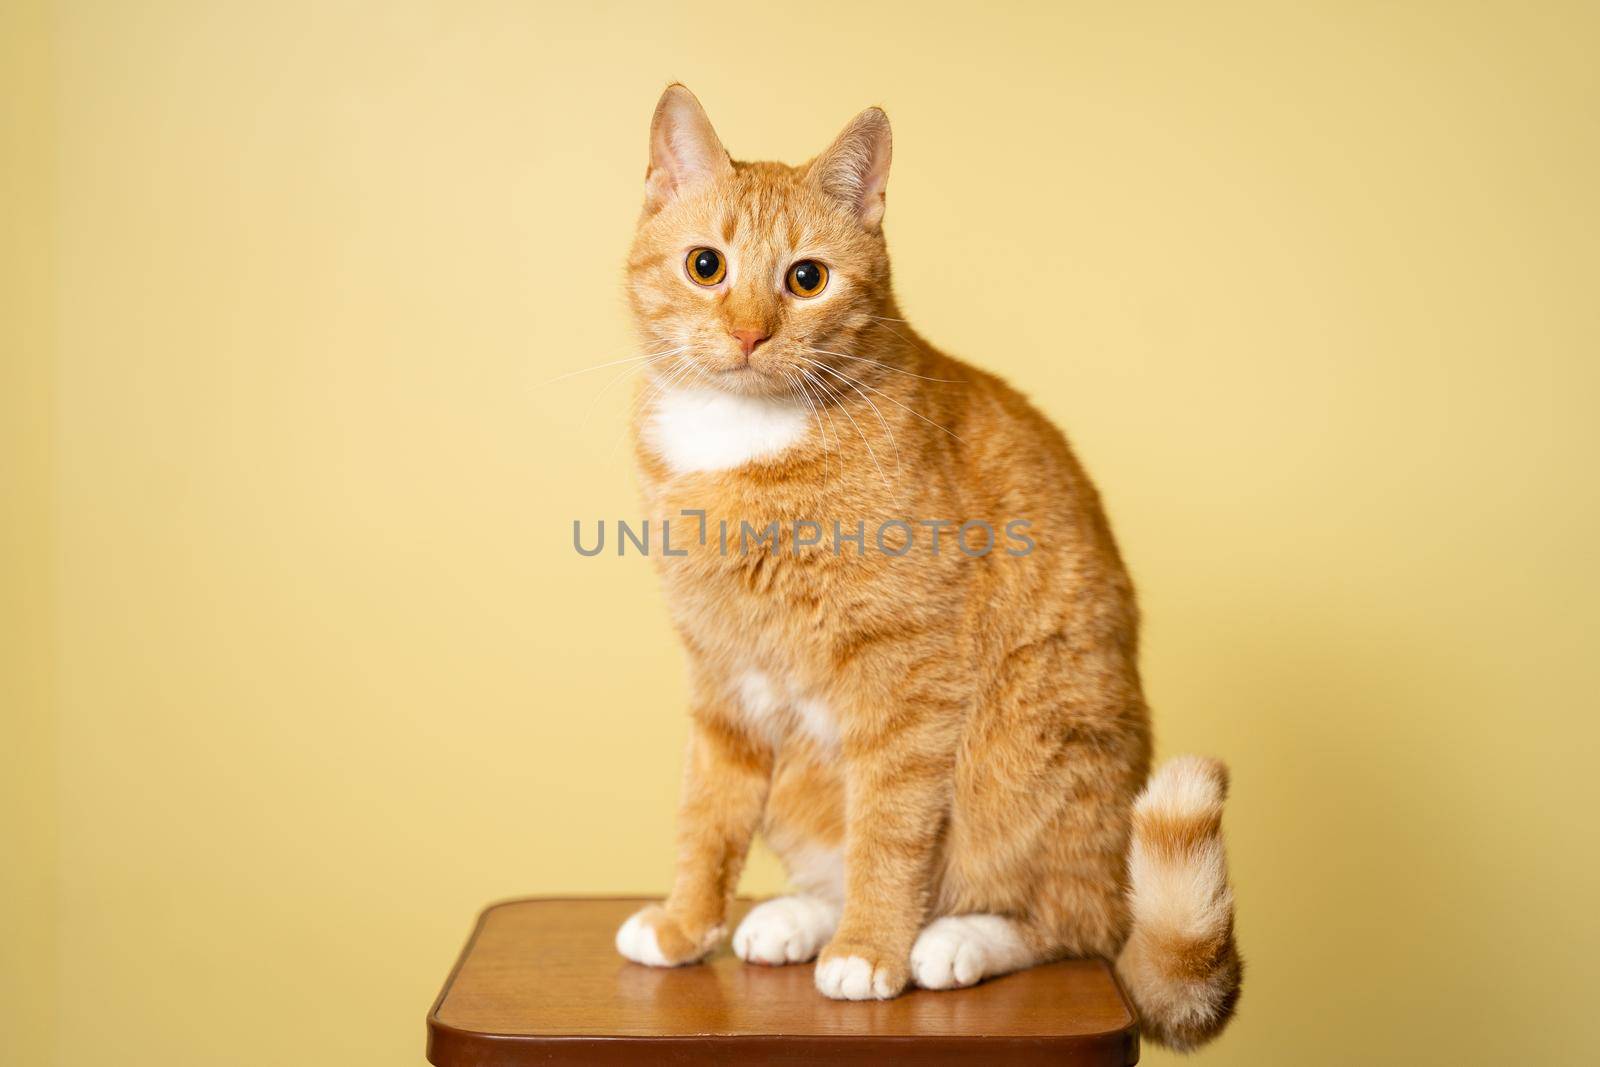 Cute adult red cat with white stripes sits posing on chair in studio against yellow background. Red-haired cat on background of a yellow wall studio shot. Theme pets, love and protection of animals by Tomashevska